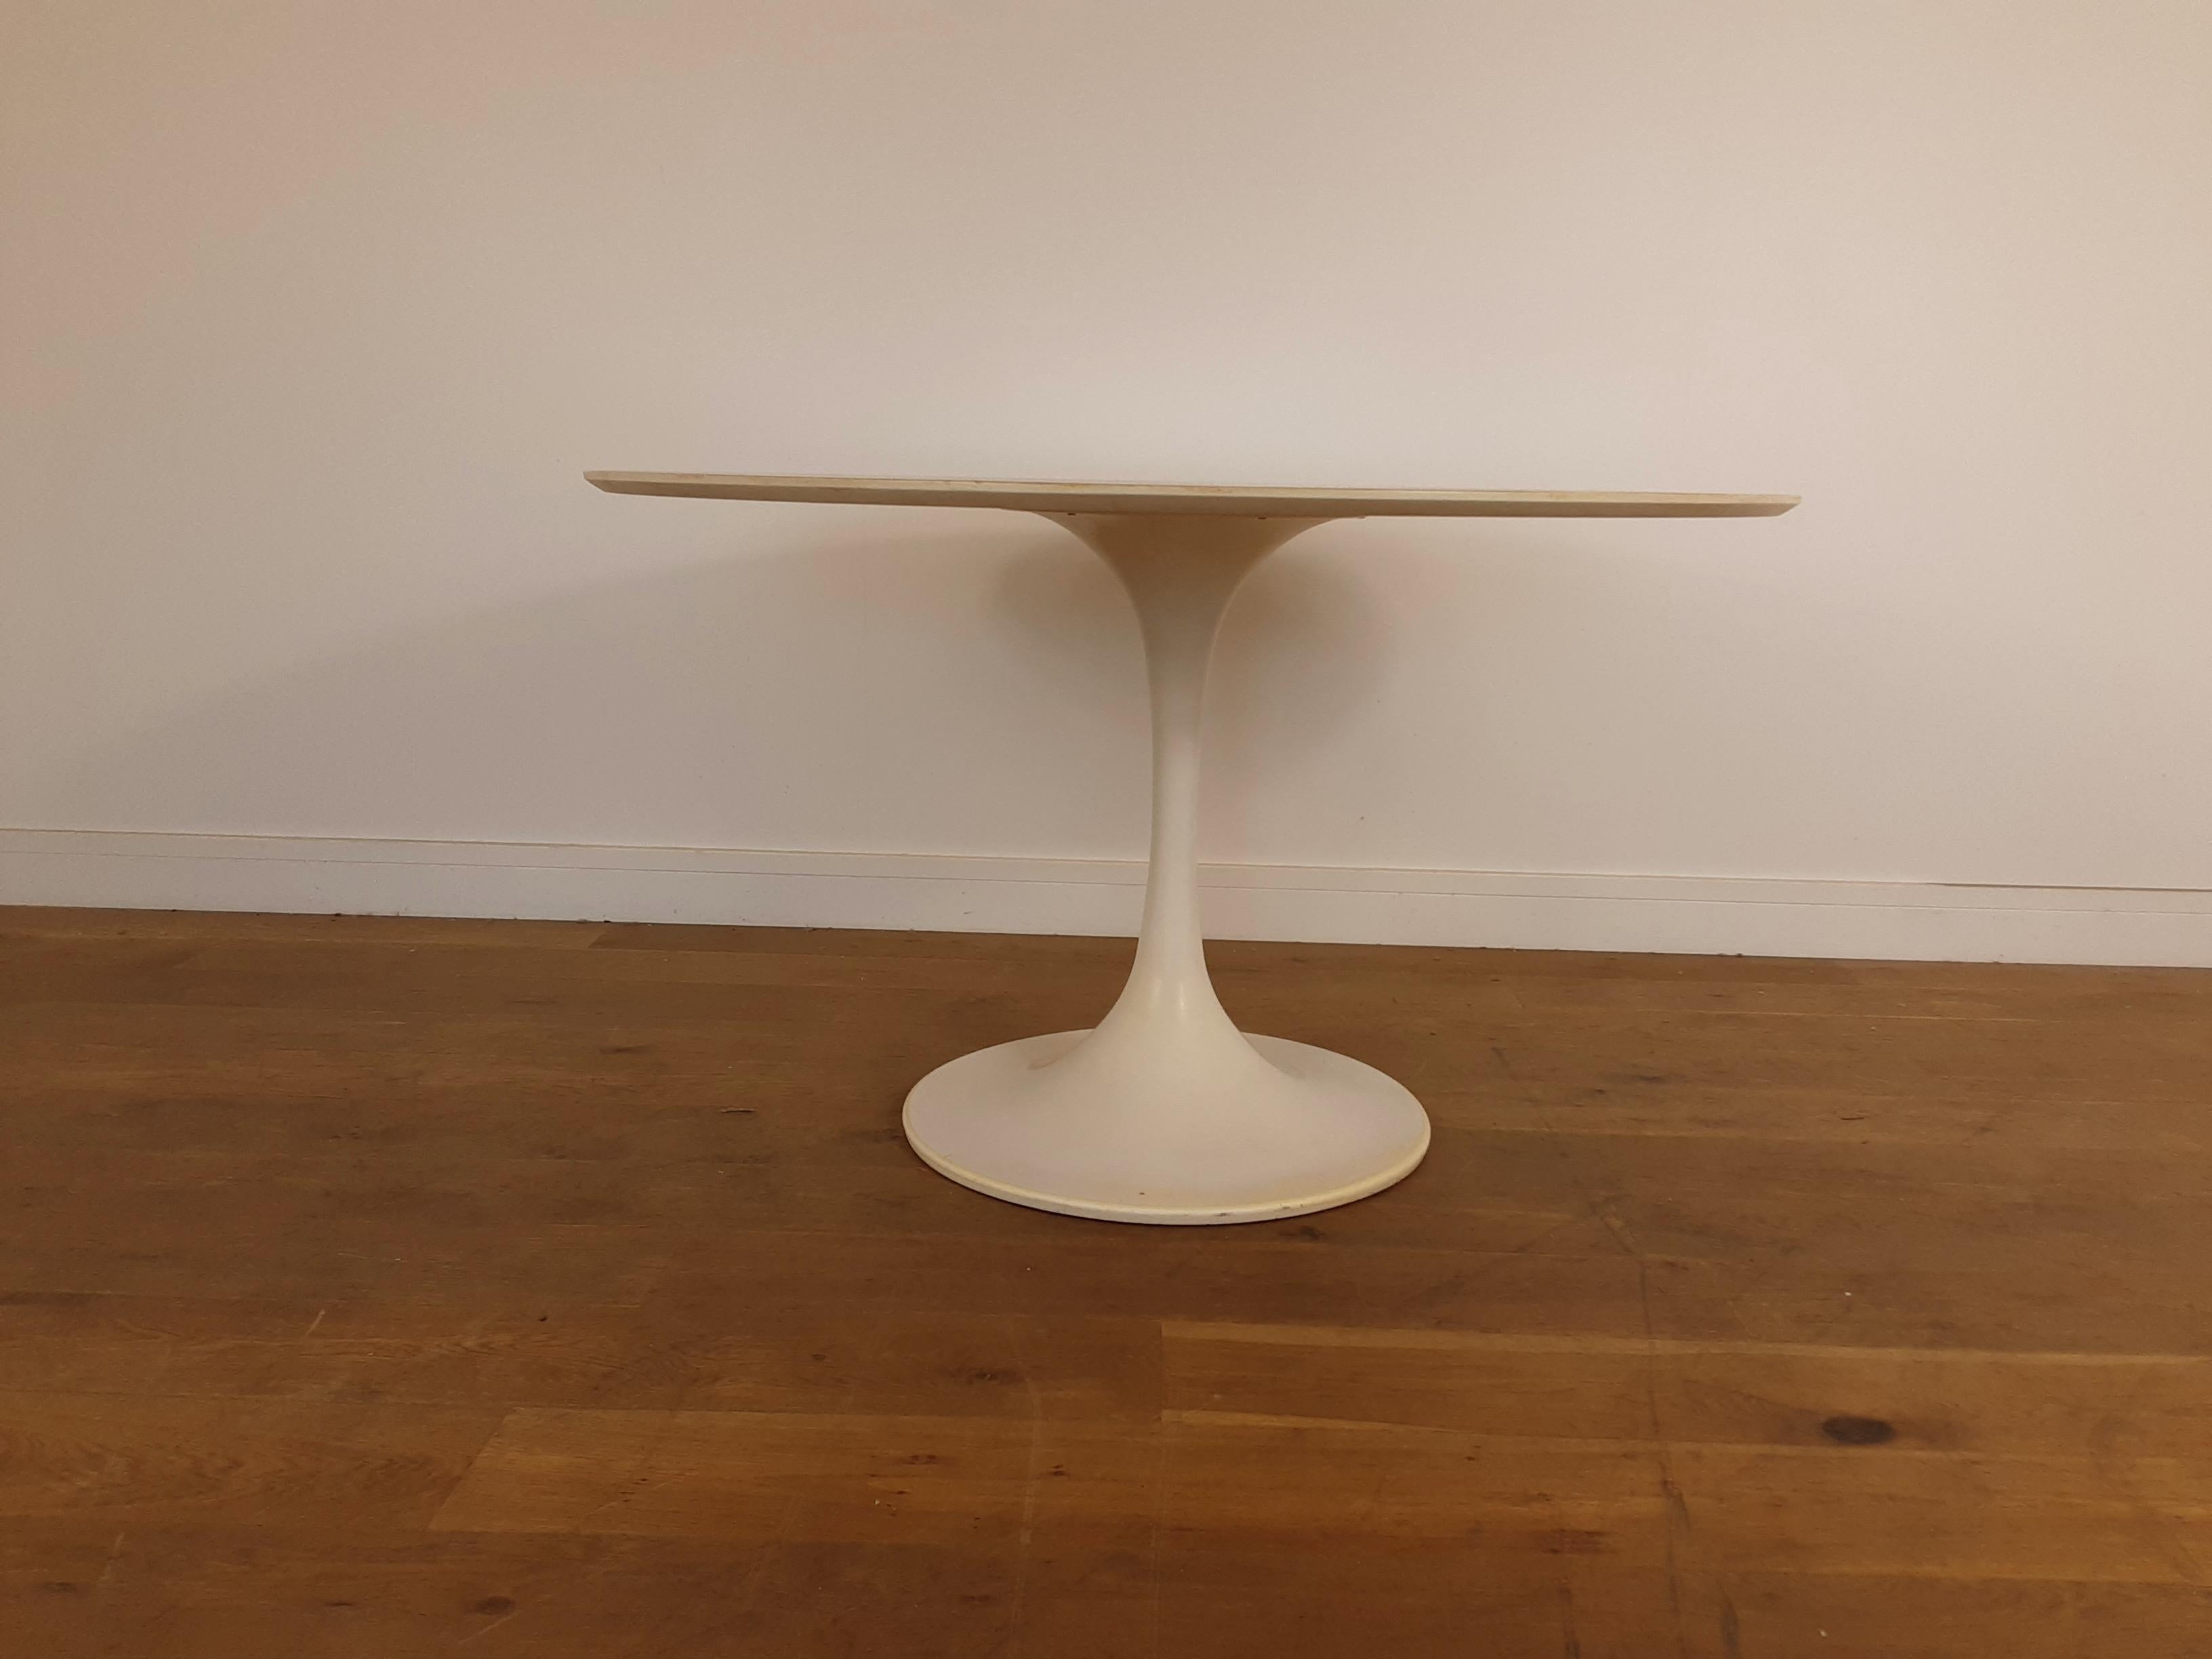 Mid-Century Modern design table.
Aluminium tulip base table with a beautiful rosewood top.
The tabletop has been professionally re polished to an original finish.
Measures: 70 cm height 120 cm diameter
British circa 1960.